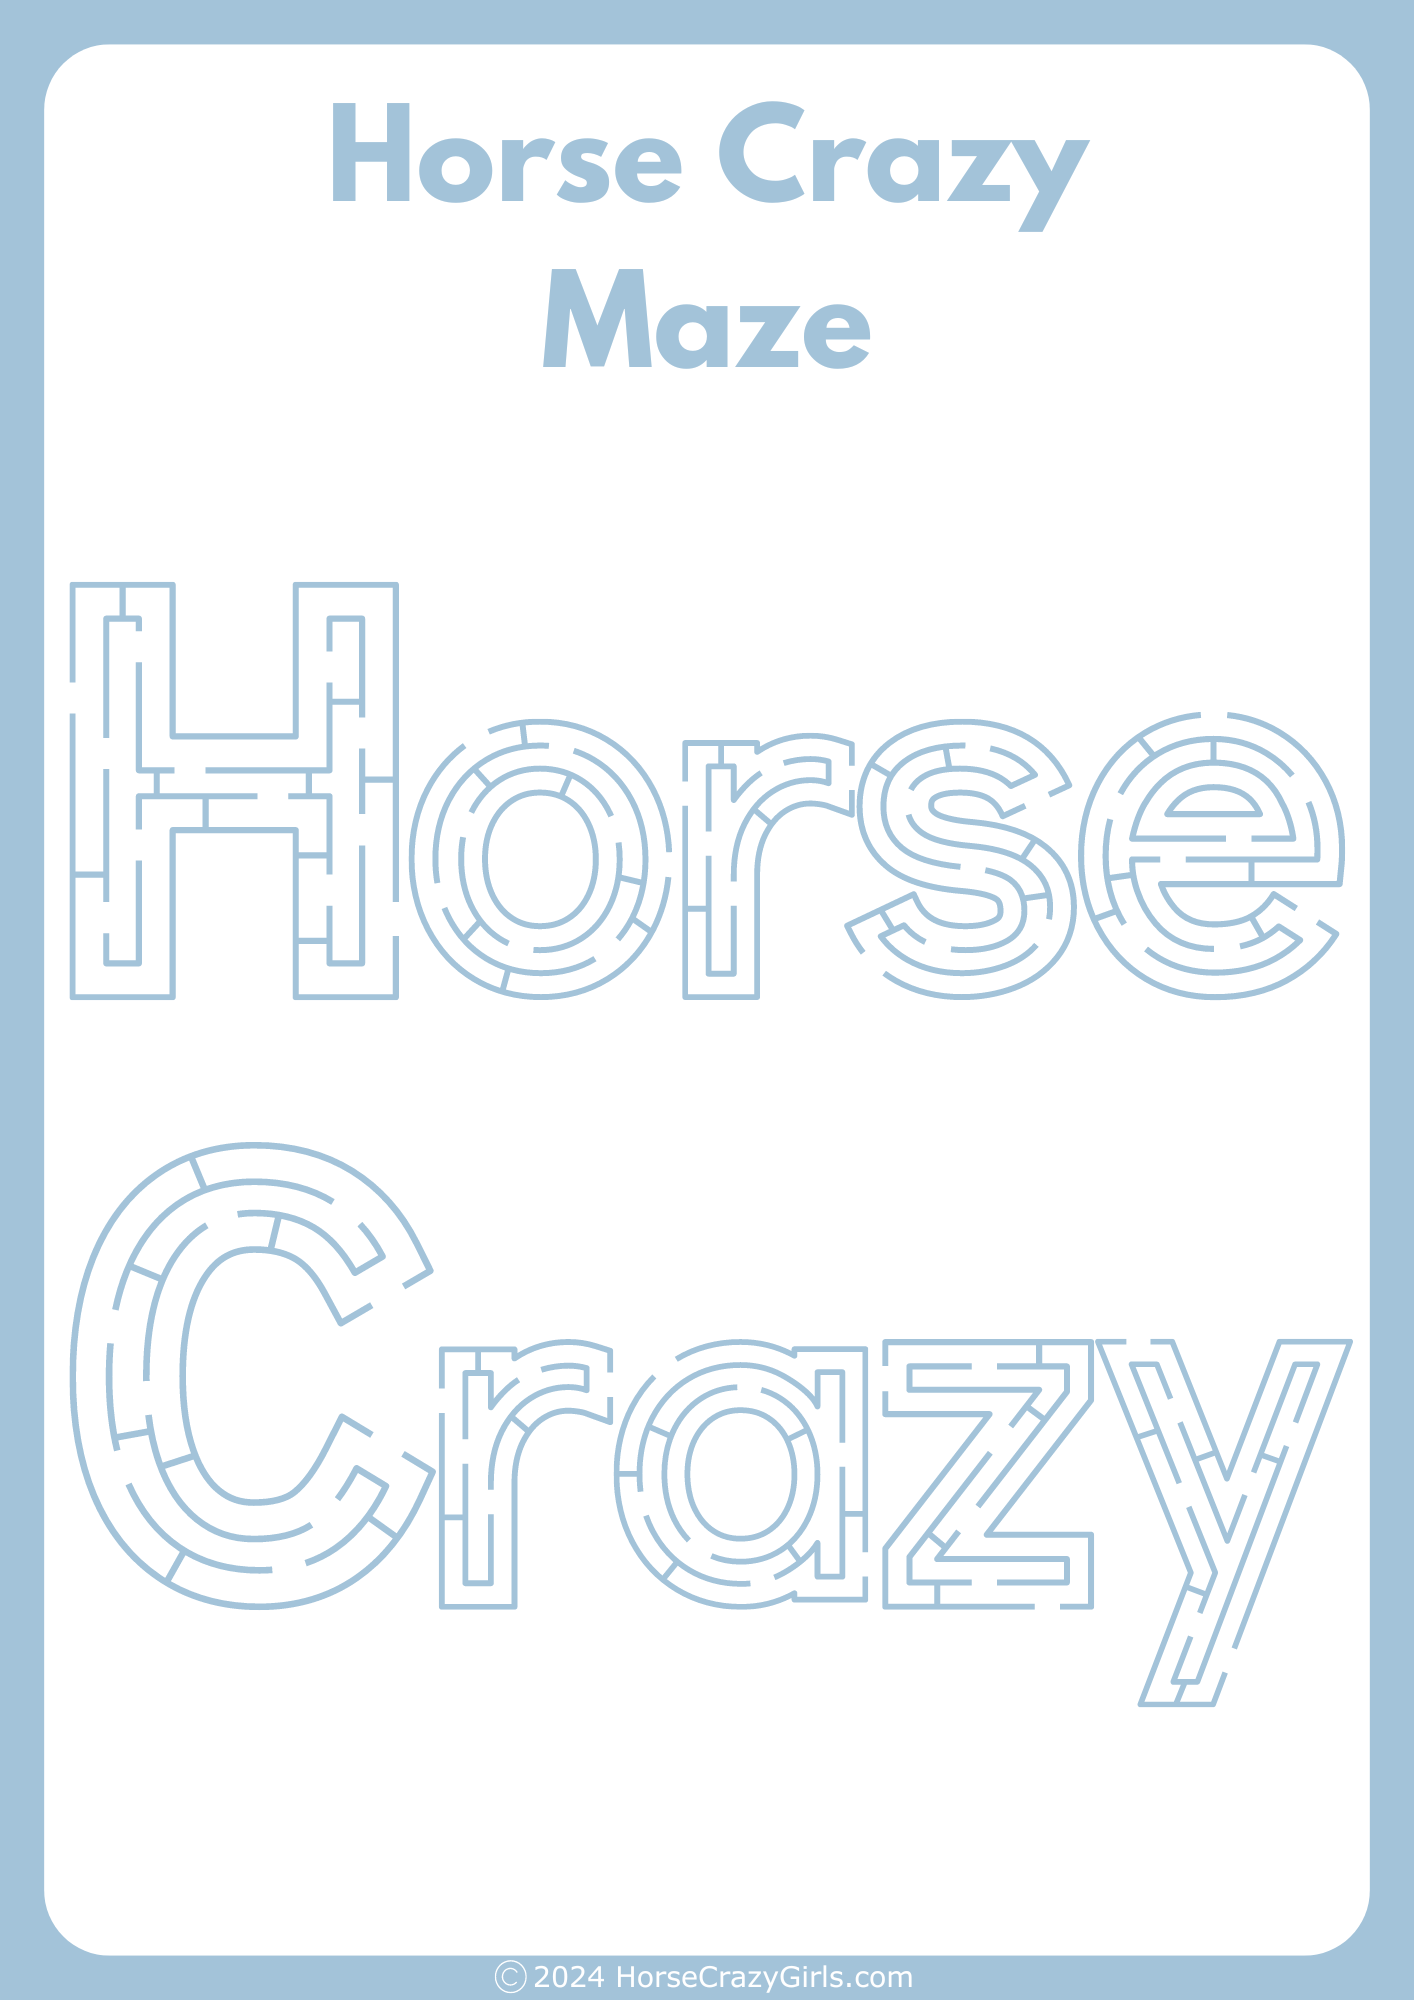 The words Horse Crazy written in letters with mazes in them